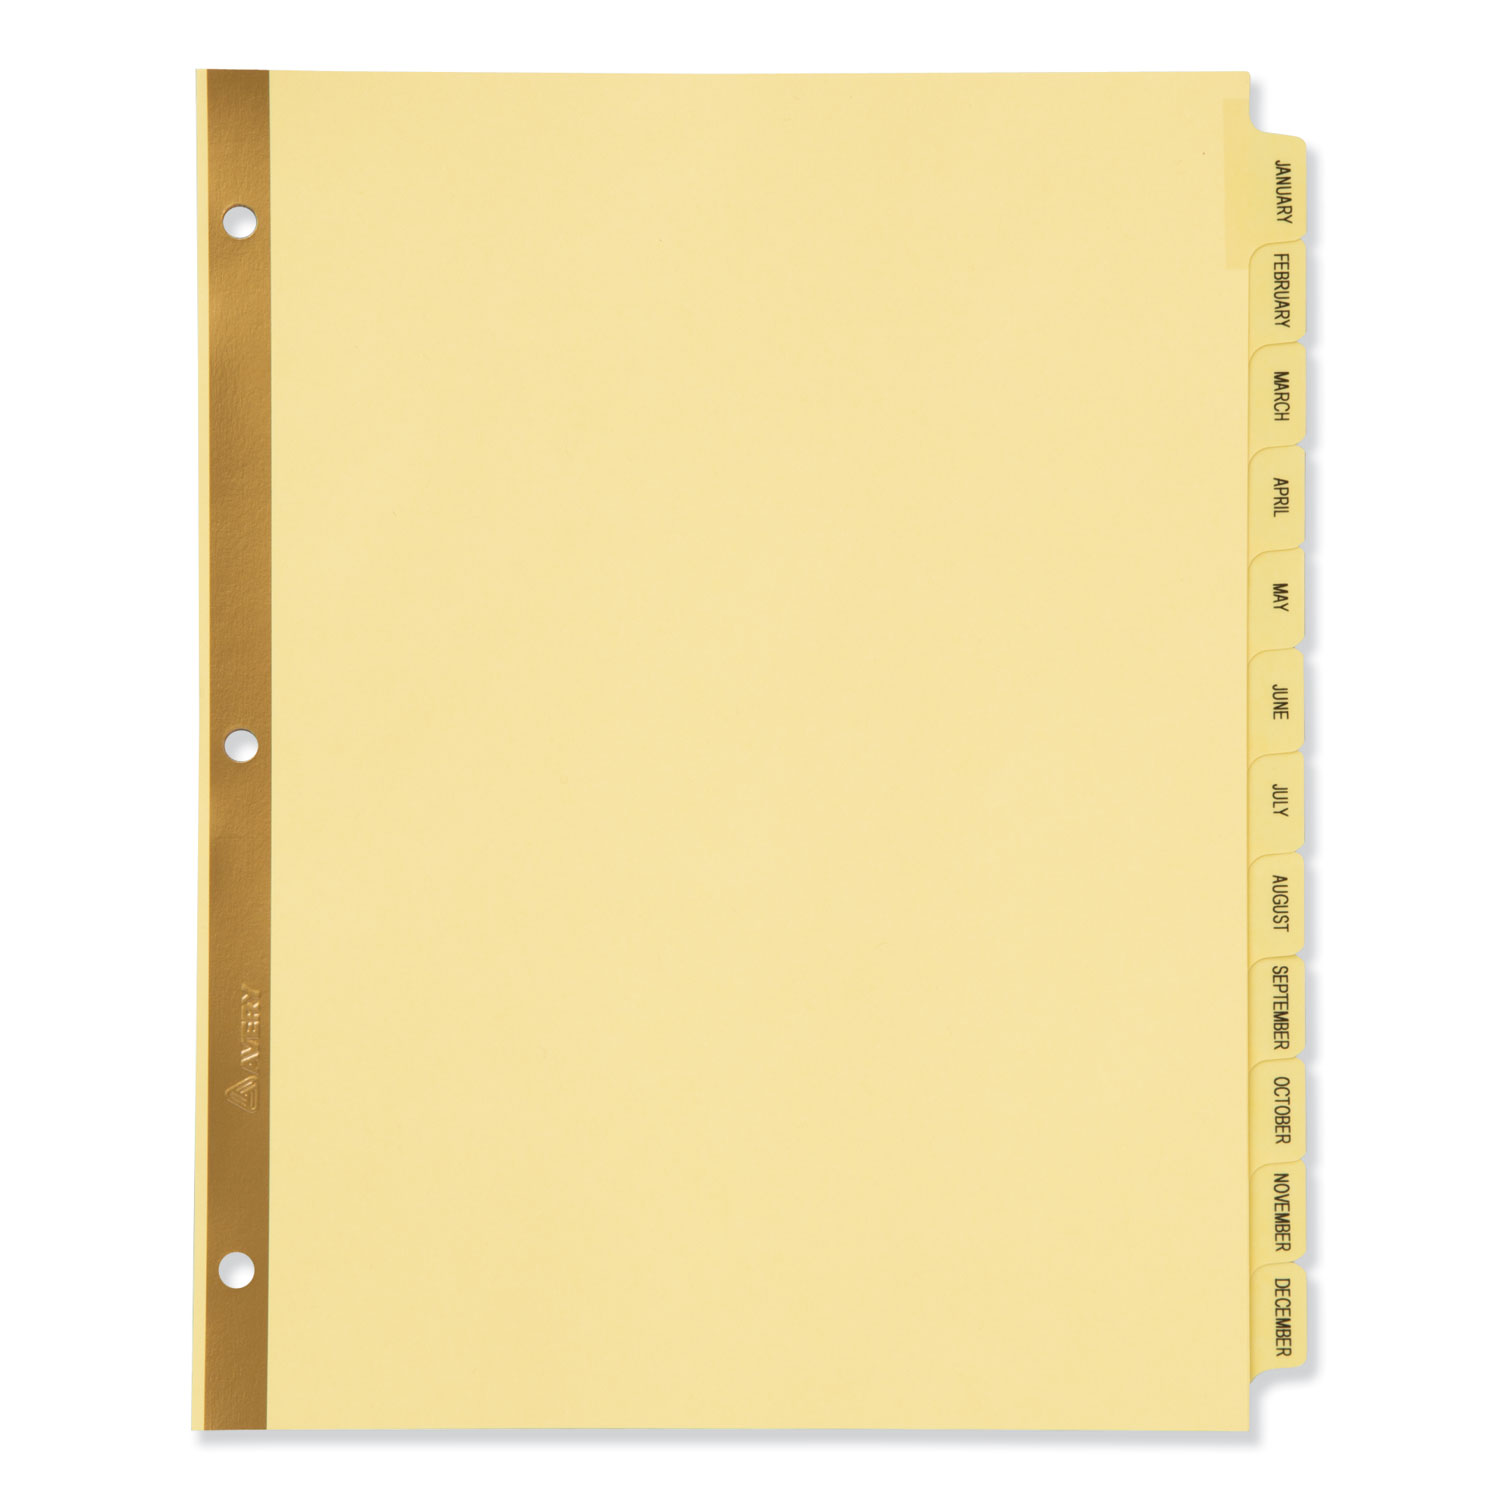  Avery 11307 Preprinted Laminated Tab Dividers w/Gold Reinforced Binding Edge, 12-Tab, Letter (AVE11307) 